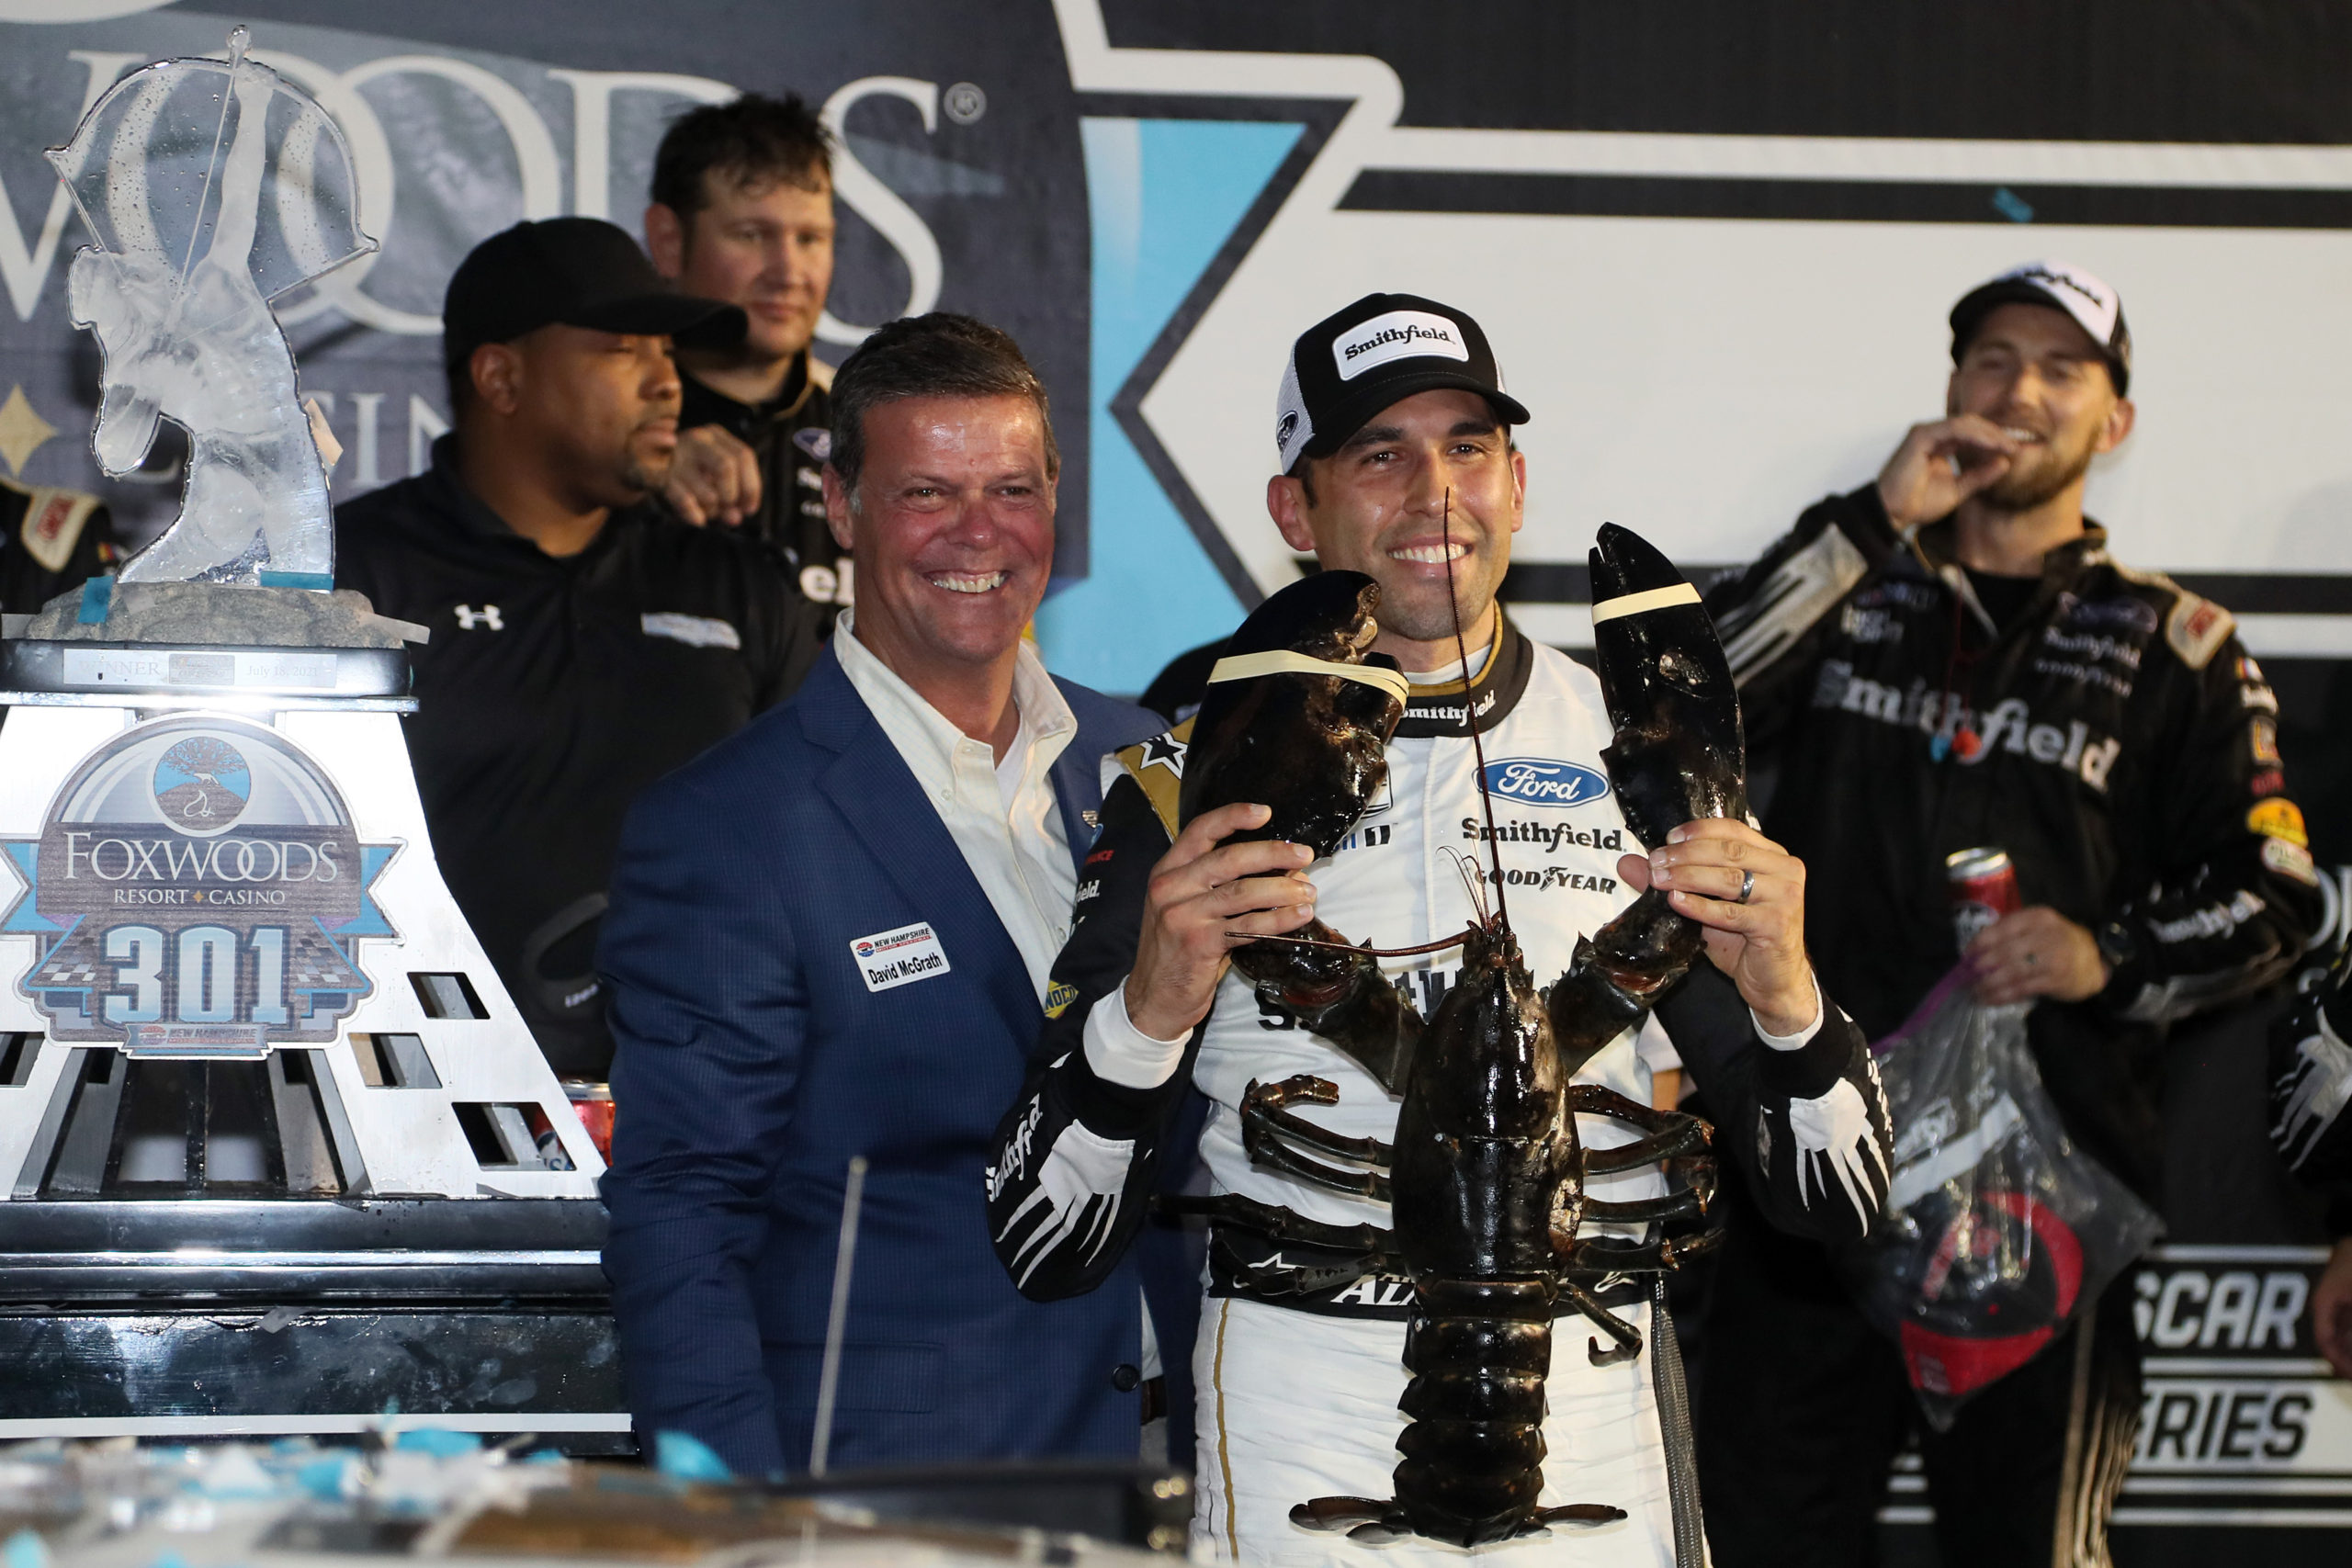 Aric Almirola to Retire from NASCAR After 2022 Season